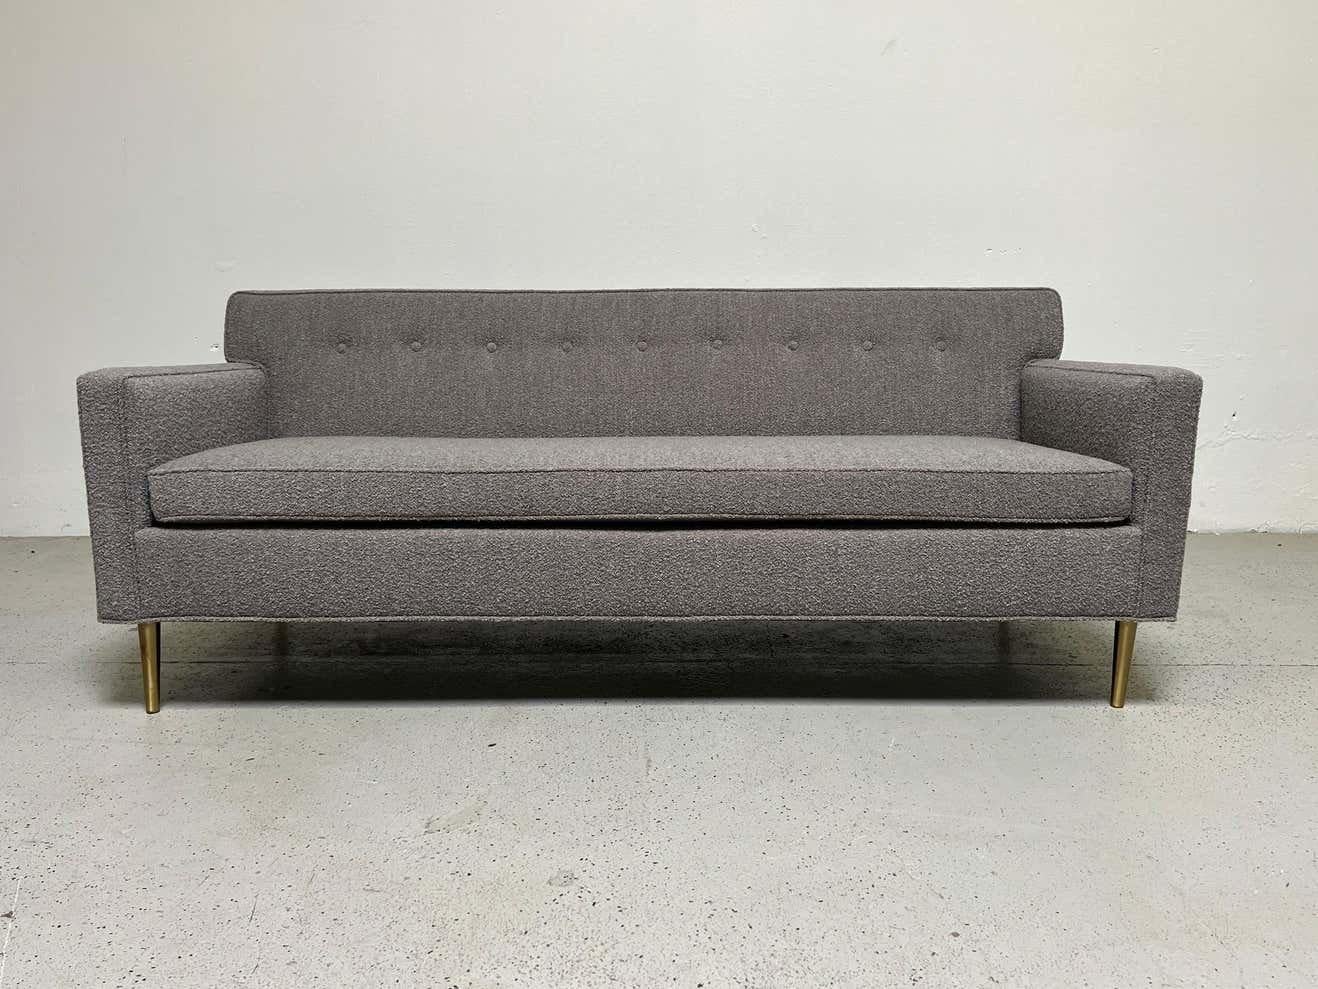 A small sofa / settee designed by Edward Wormley for Dunbar. Iconic form with tapered brass legs. Fully restored and upholstered in Designtex / Lambert / Smoke.
